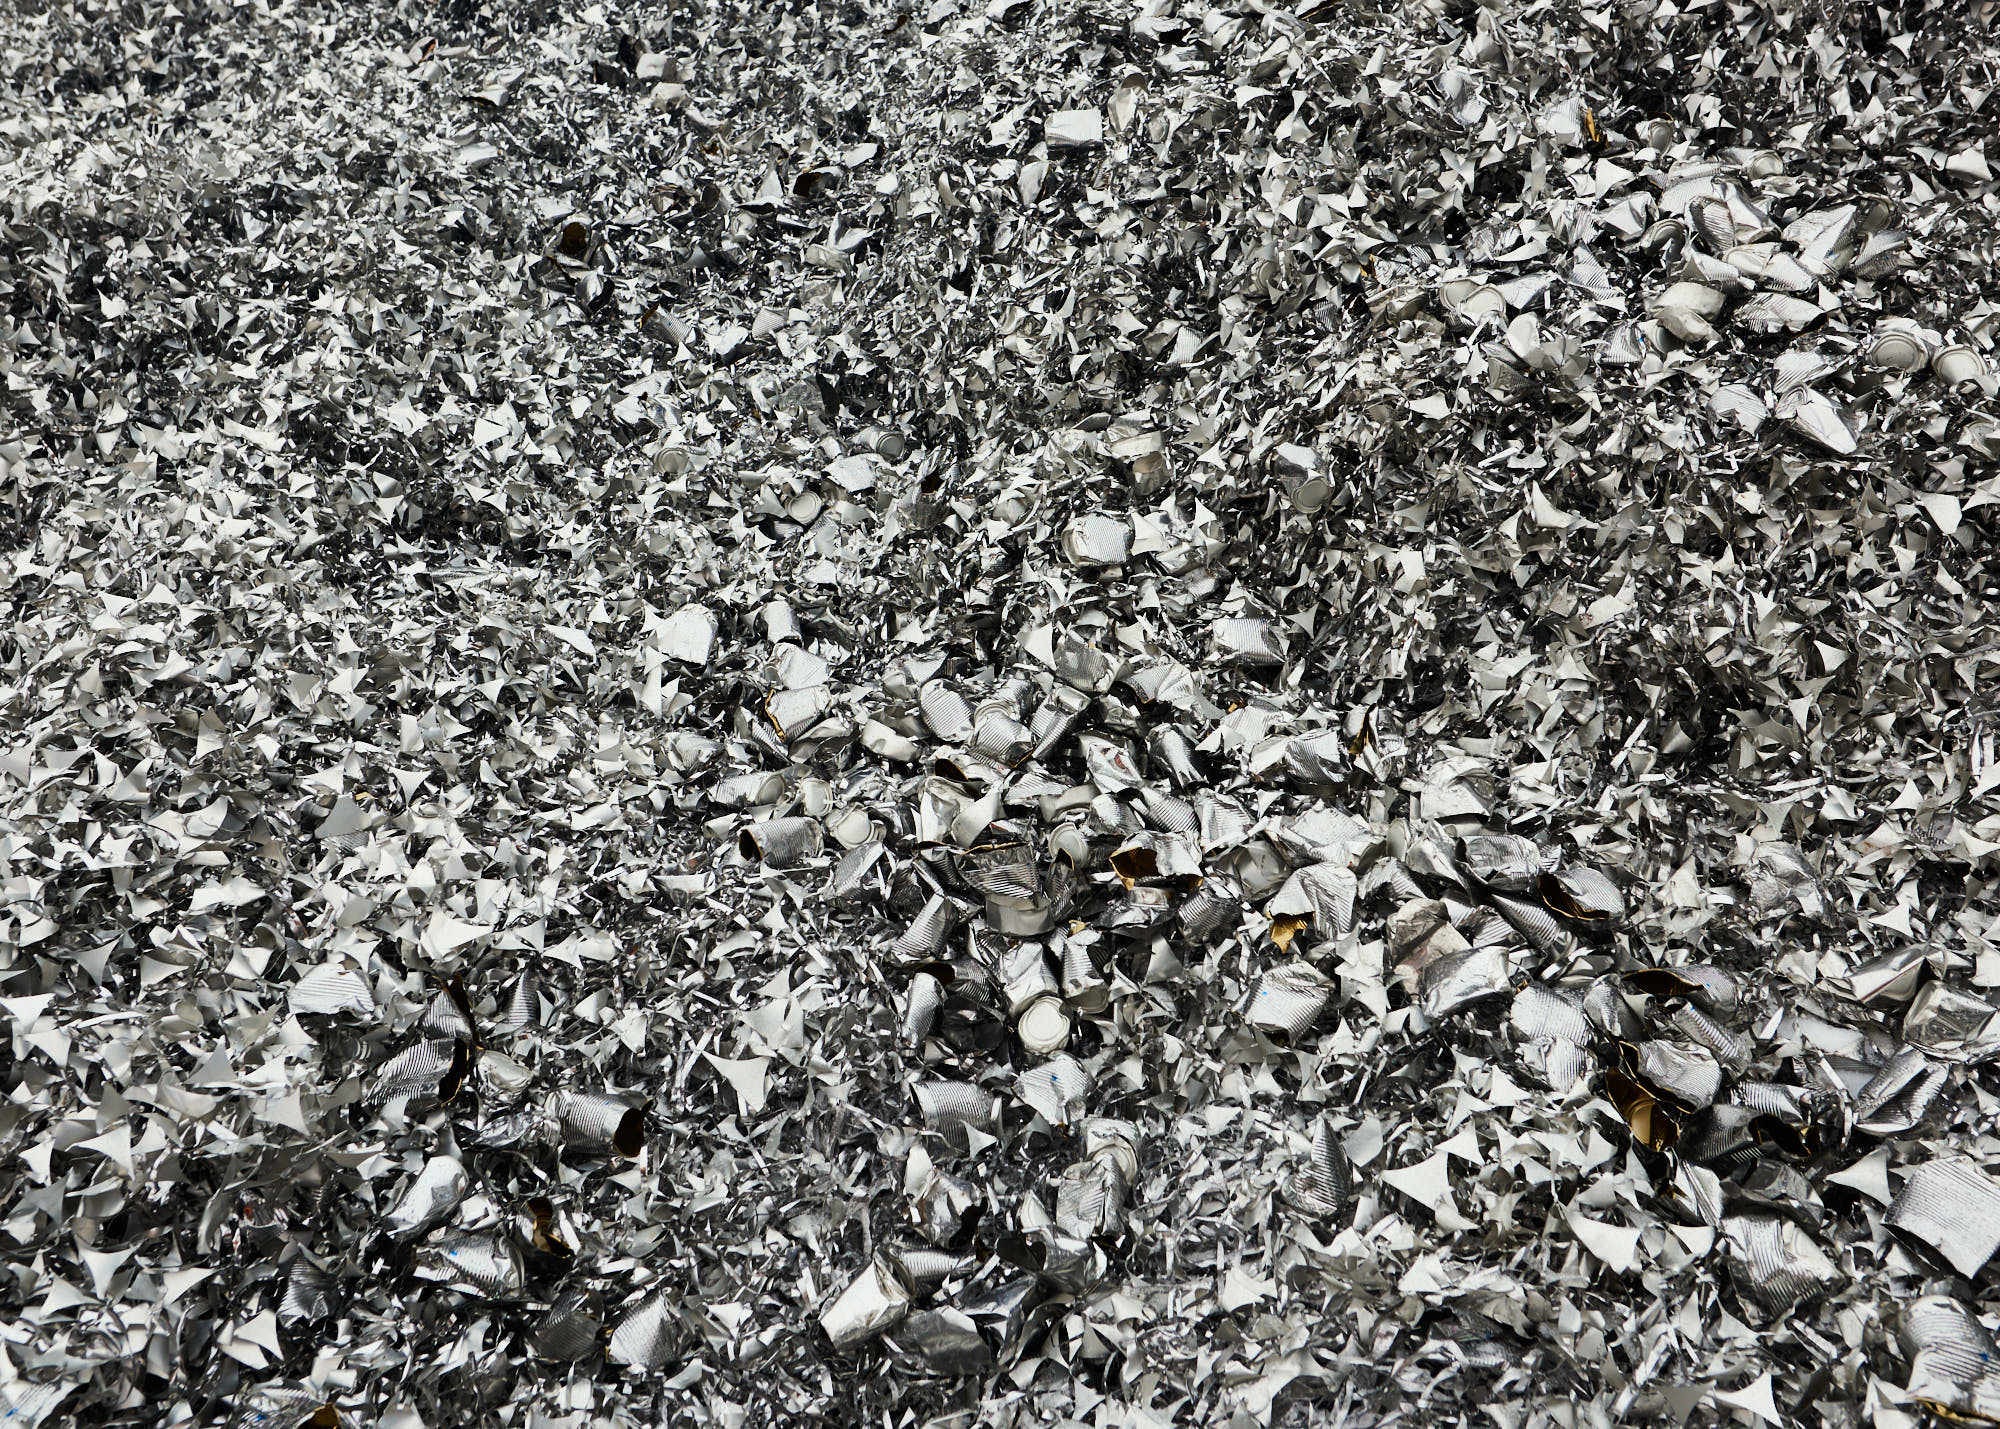 Close-up detail photograph of recycling materials for Toronto steel company